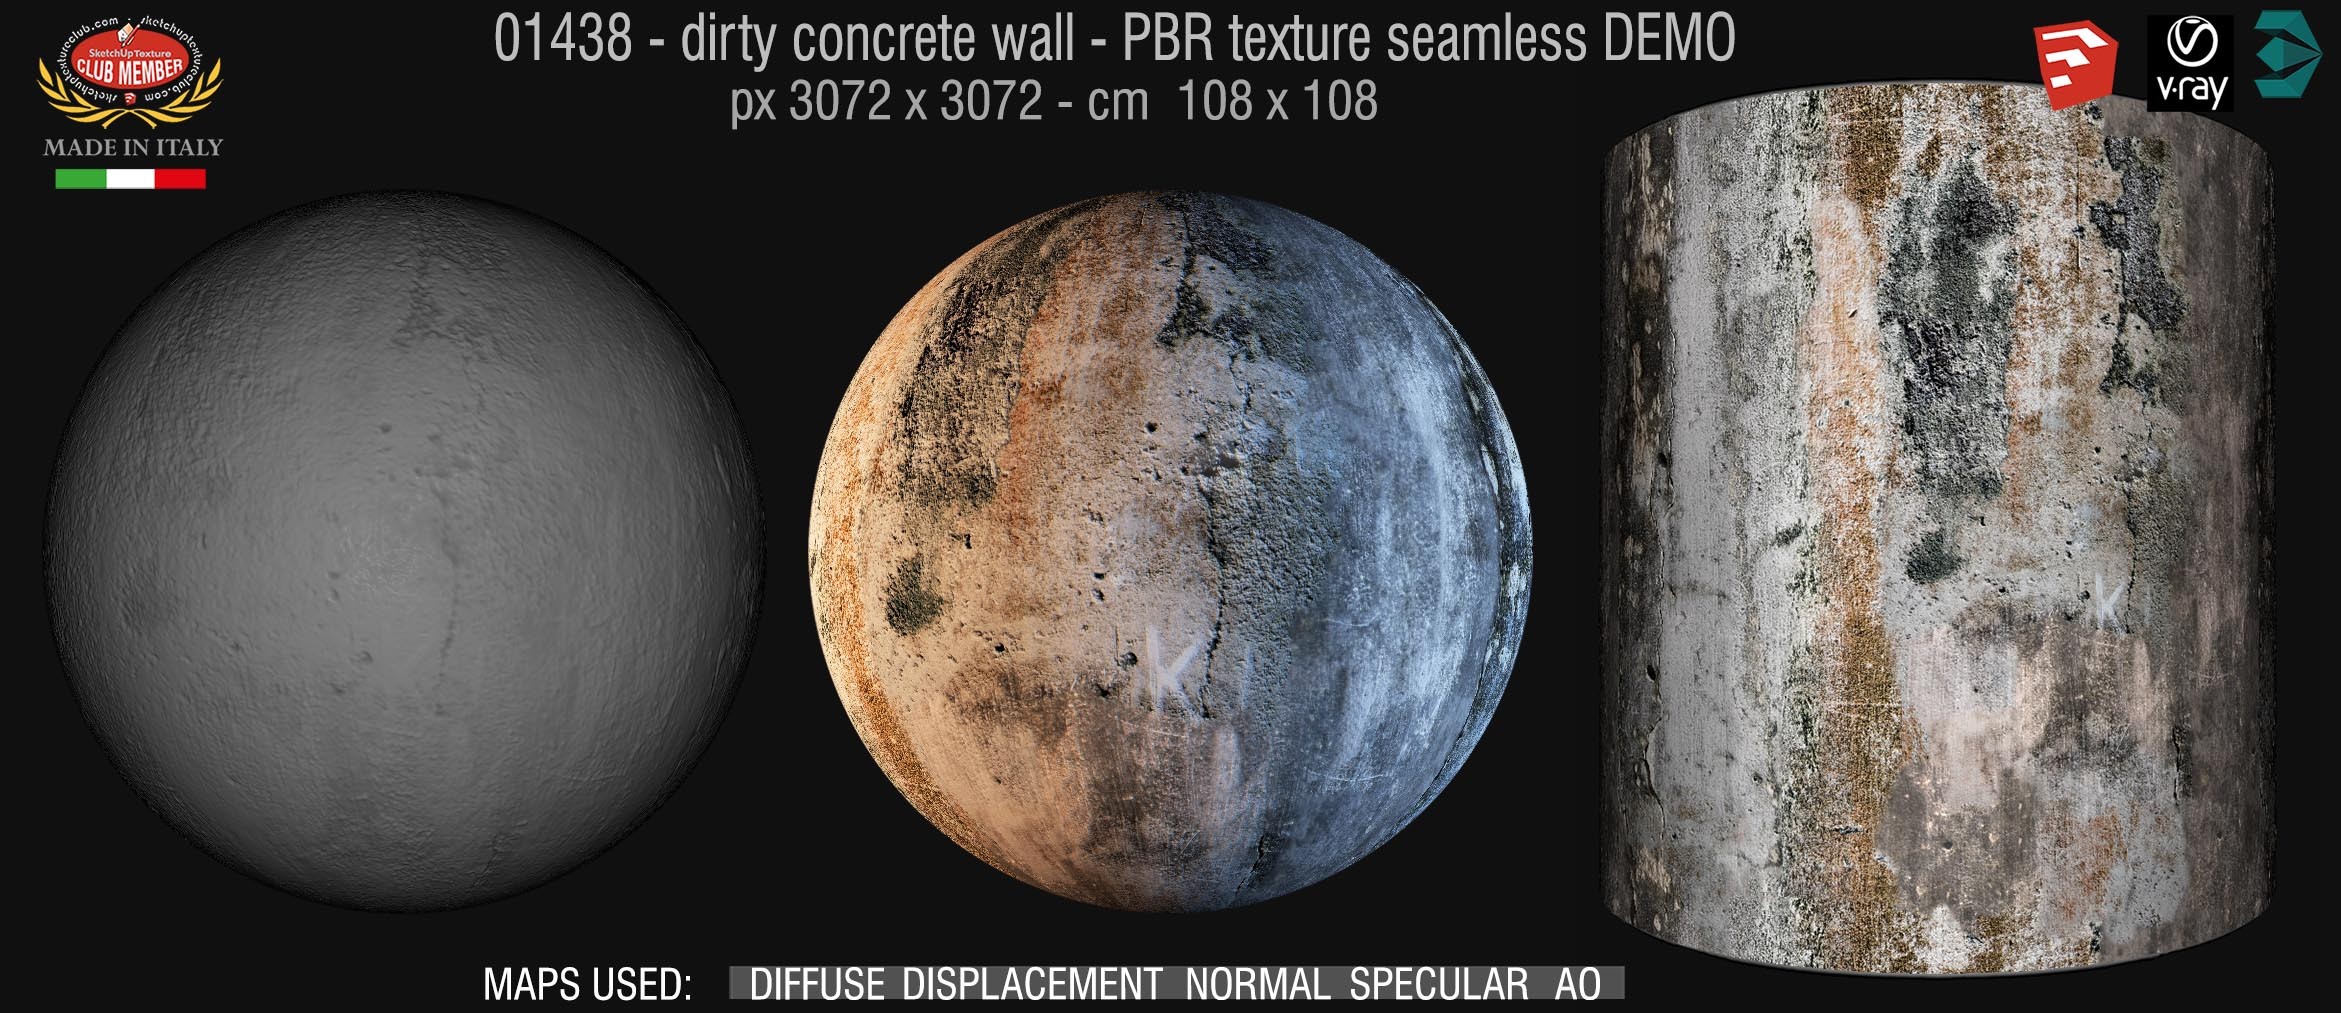 01438 Concrete bare dirty wall PBR texture seamless DEMO